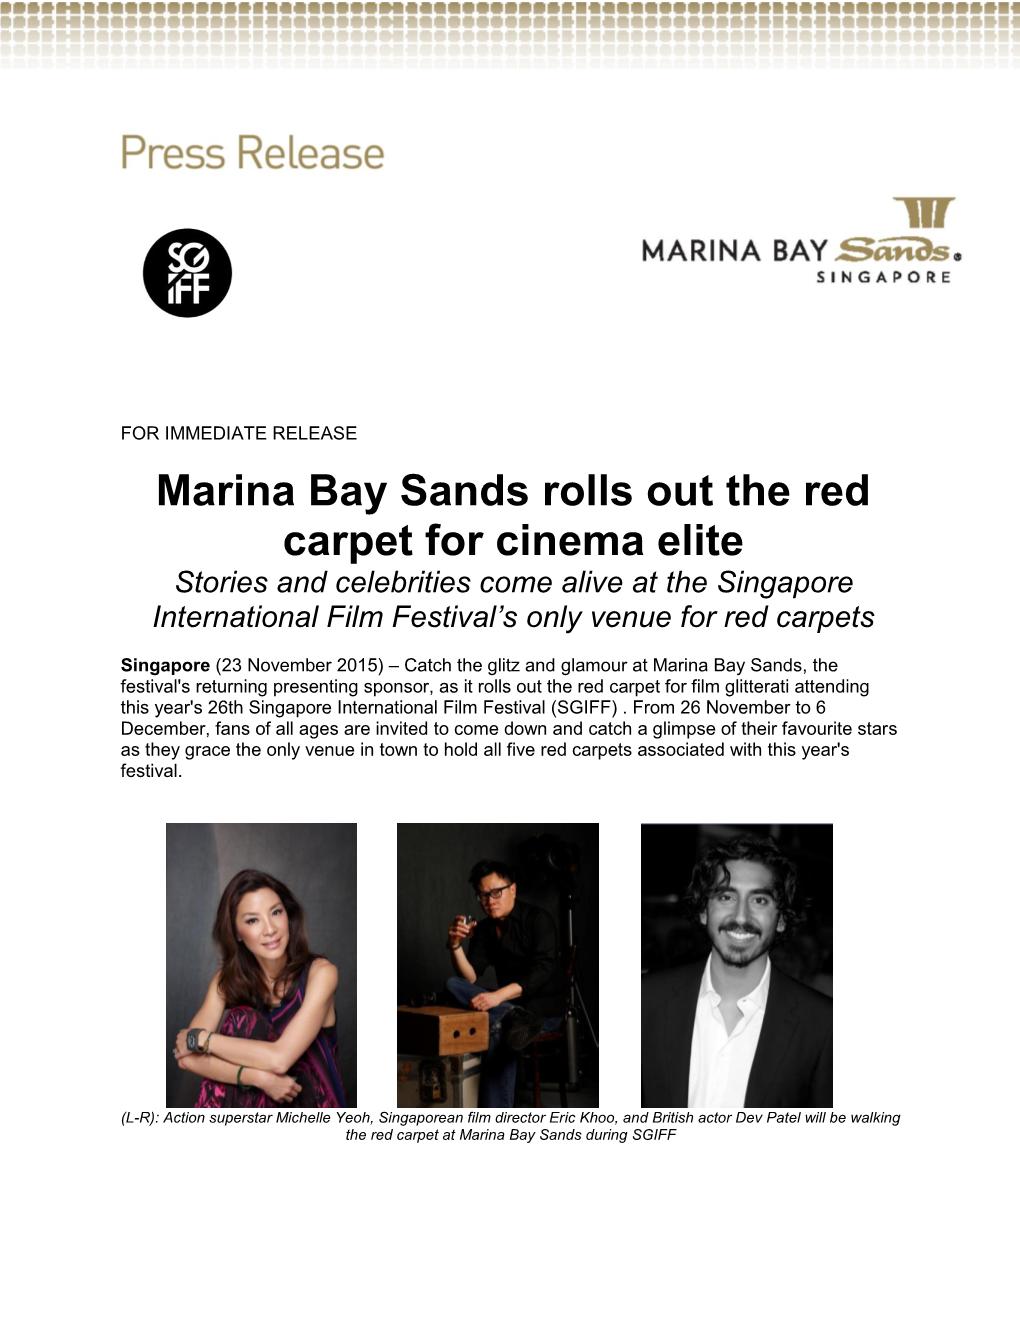 Marina Bay Sands Rolls out Red Carpet for SGIFF